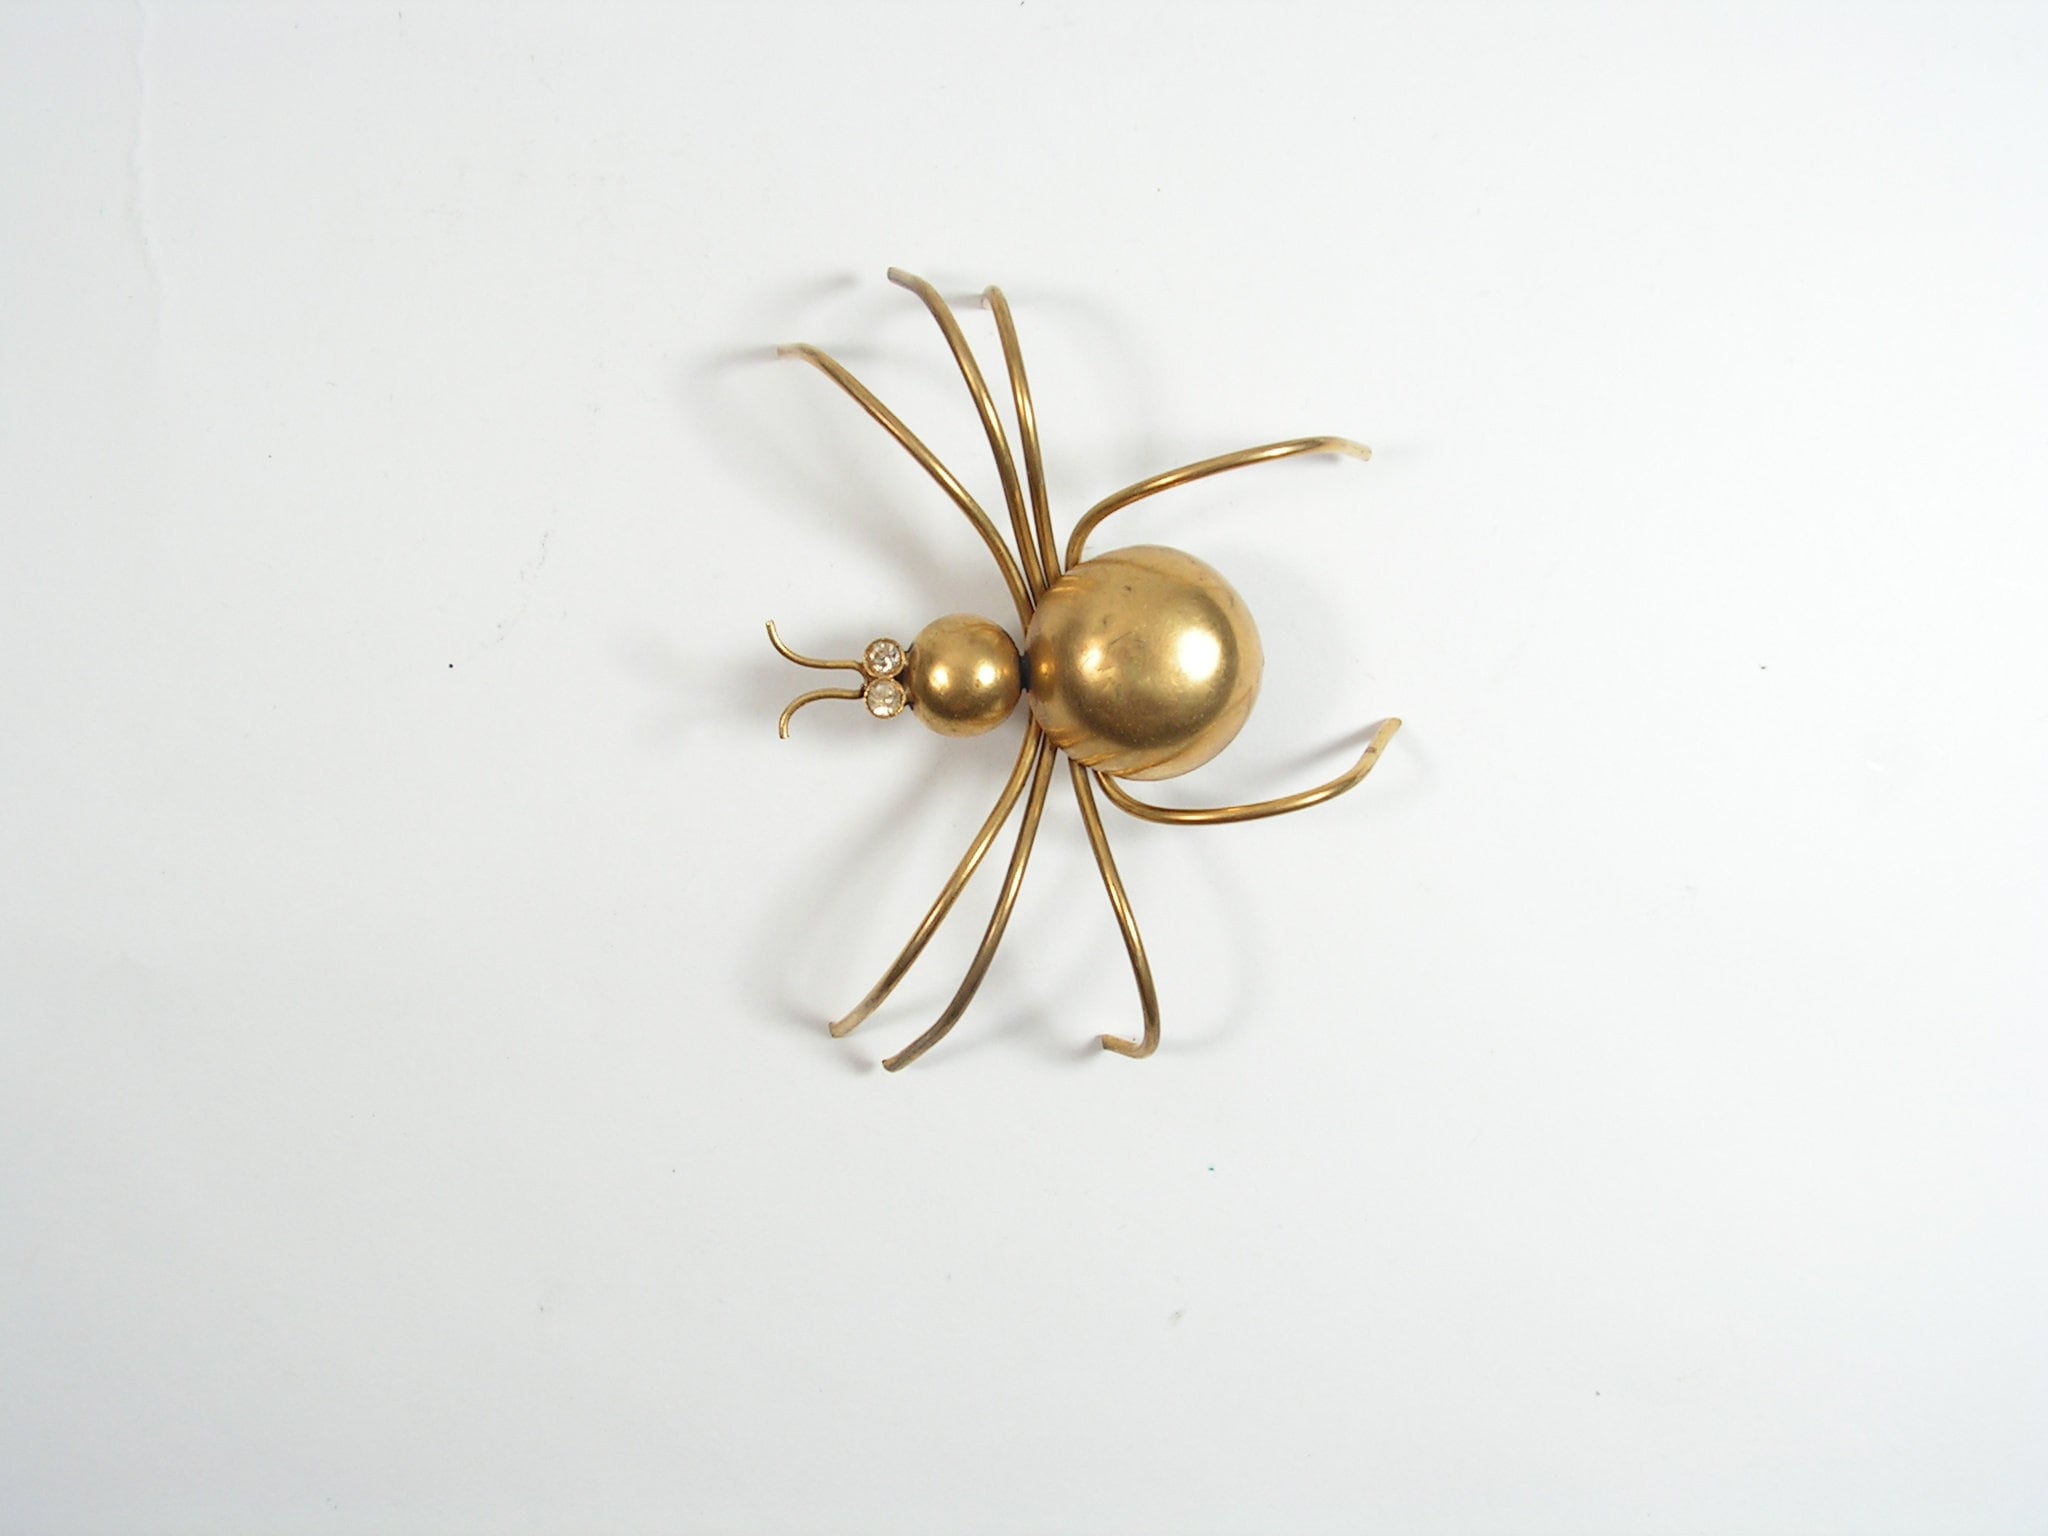 Antique Russian 14K Rose Gold Enamel Spider Brooch With Diamonds